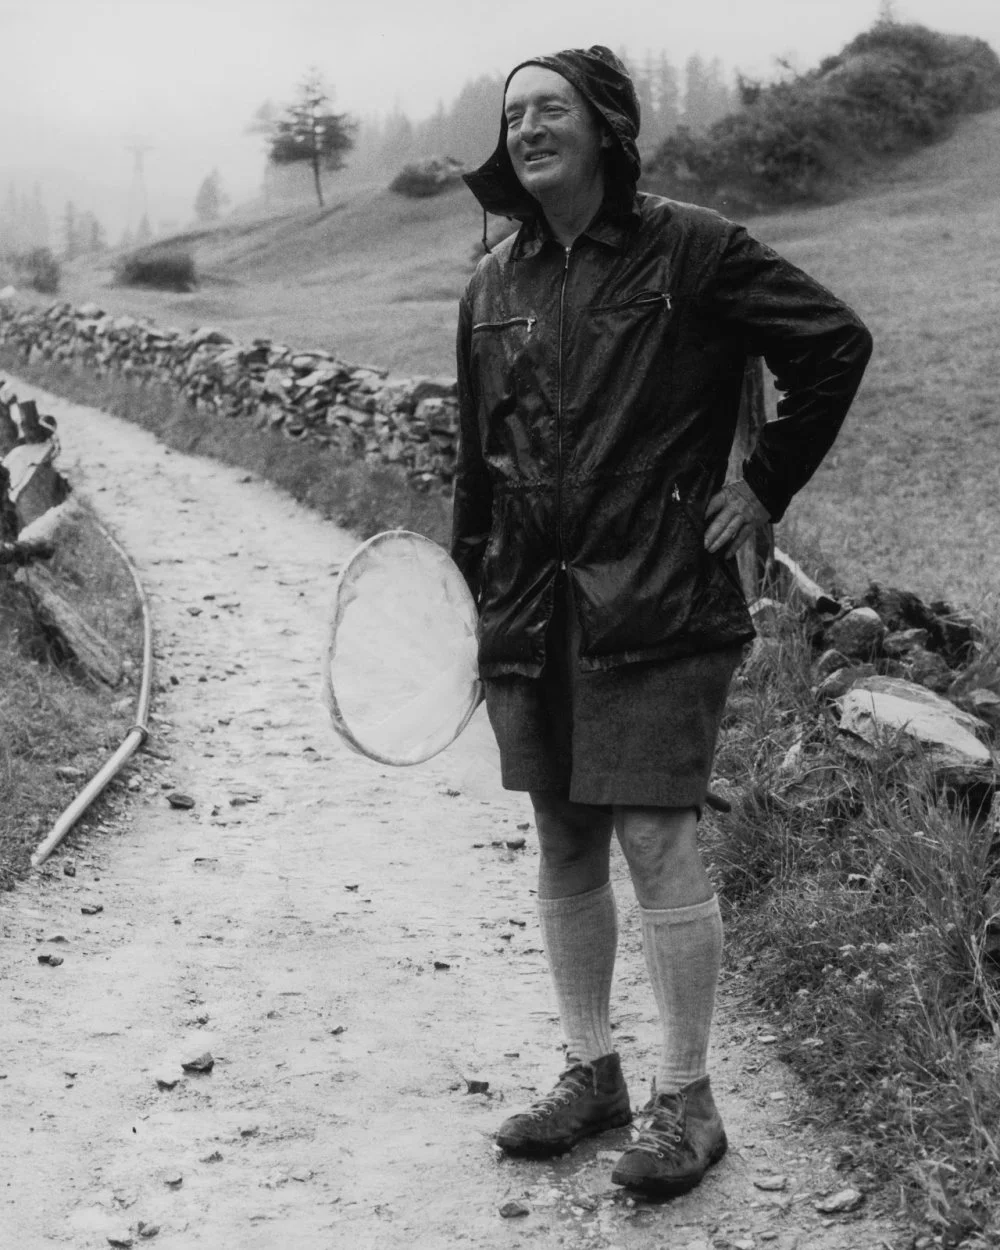 Vladimir Nabokov (1899 - 1977) carrying a net while hunting for butterflies in the rain, Zermatt, Switzerland/Horst Tappe/Getty Images